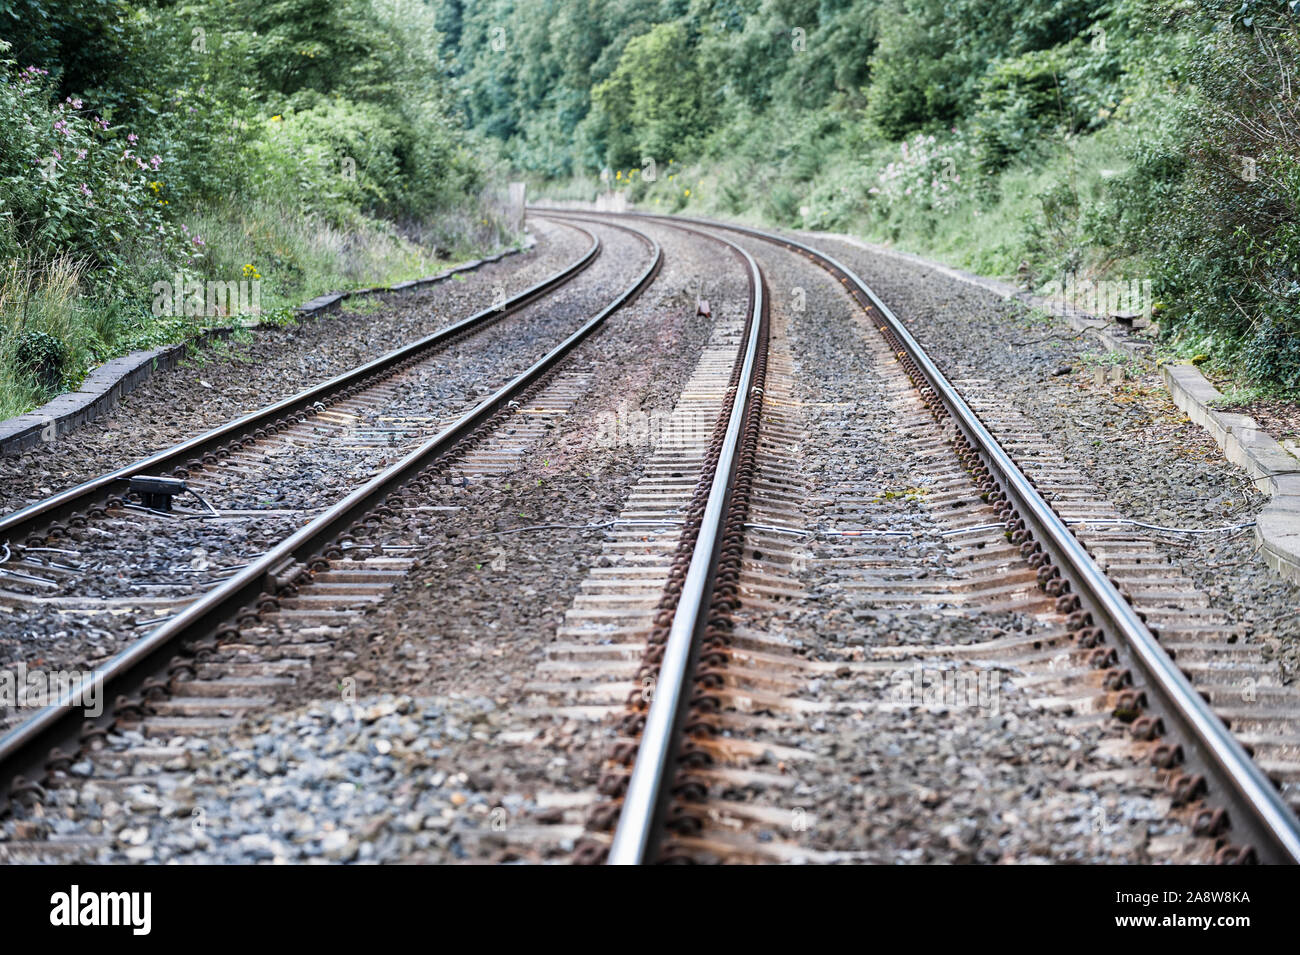 Railway tracks approaching a bend Stock Photo